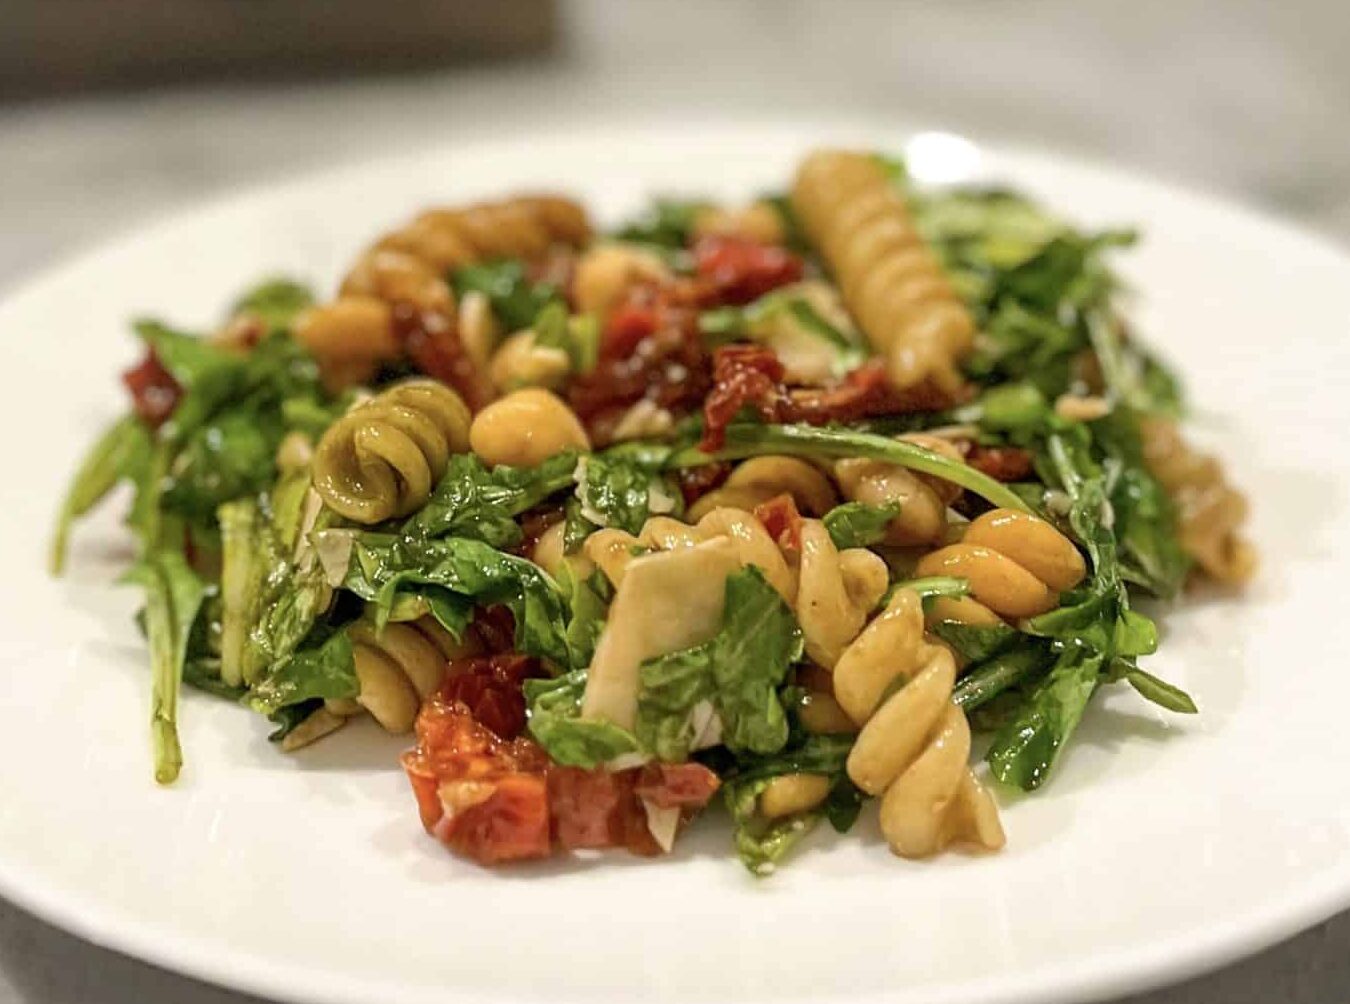 Arugula Pasta Salad with Chickpeas and Sun Dried Tomatoes